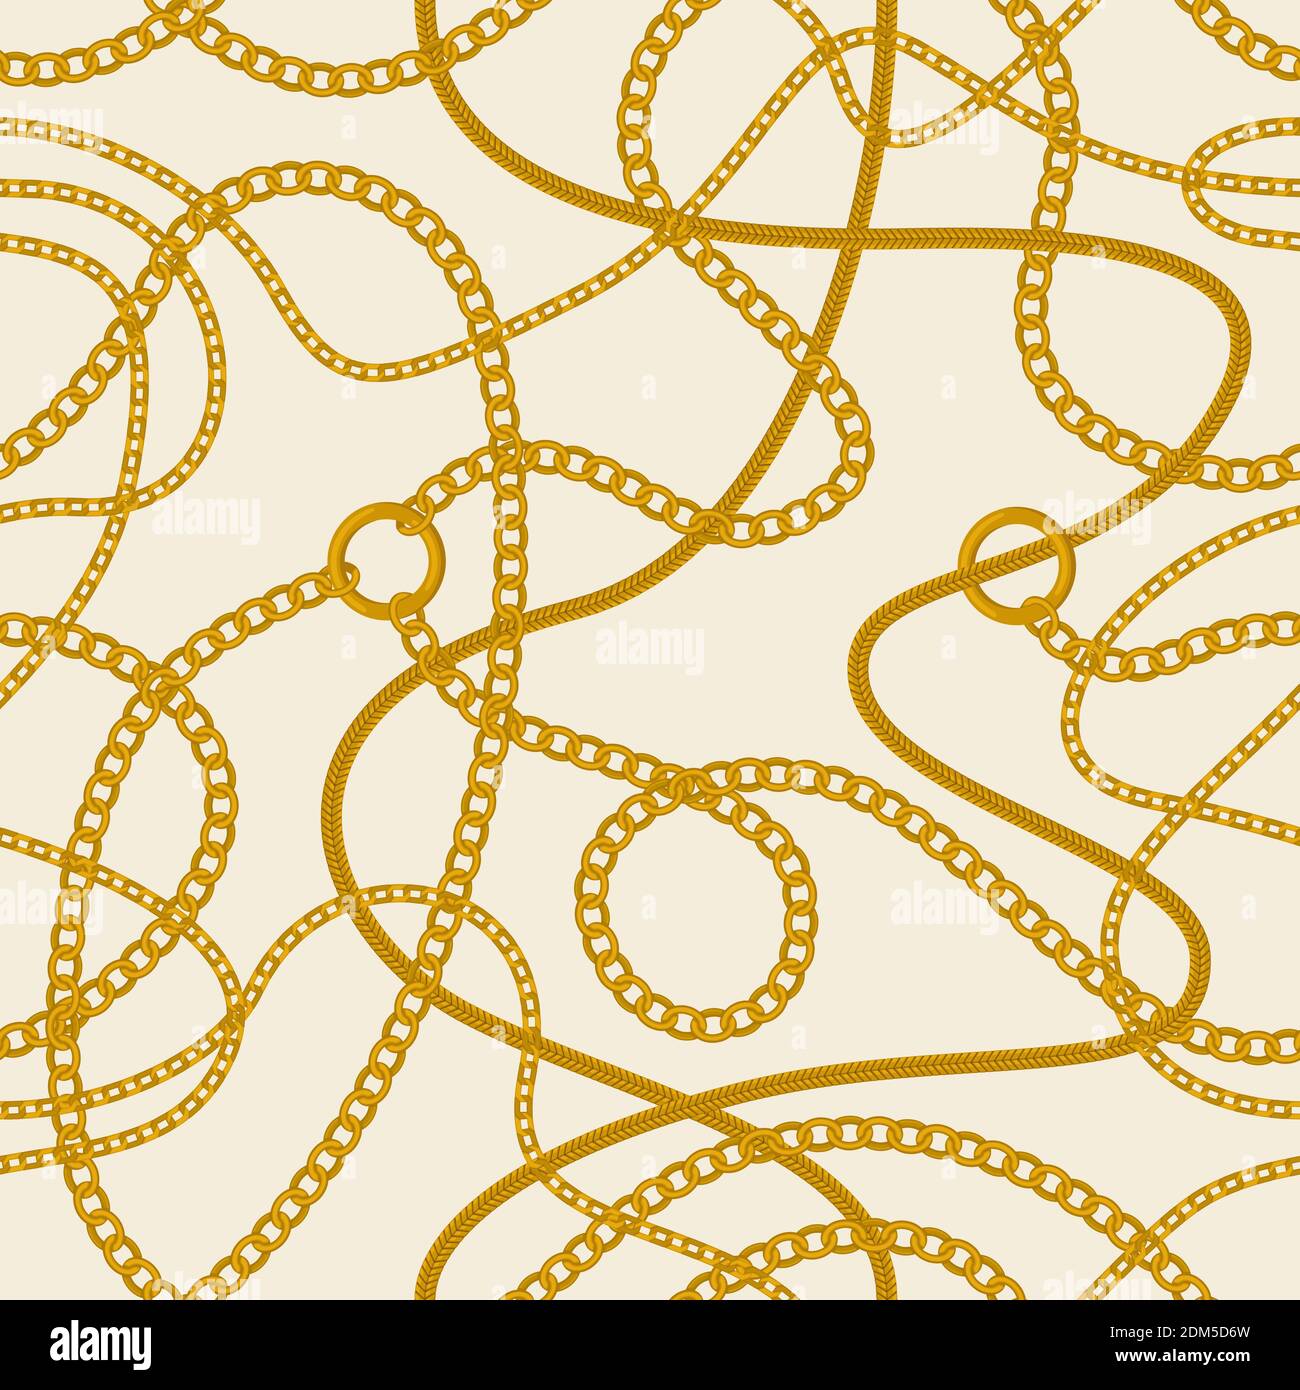 Golden chains pattern. Seamless gold ring, belts, chains and metal accessories backdrop. Chain wrapping or textile vector background illustration Stock Vector